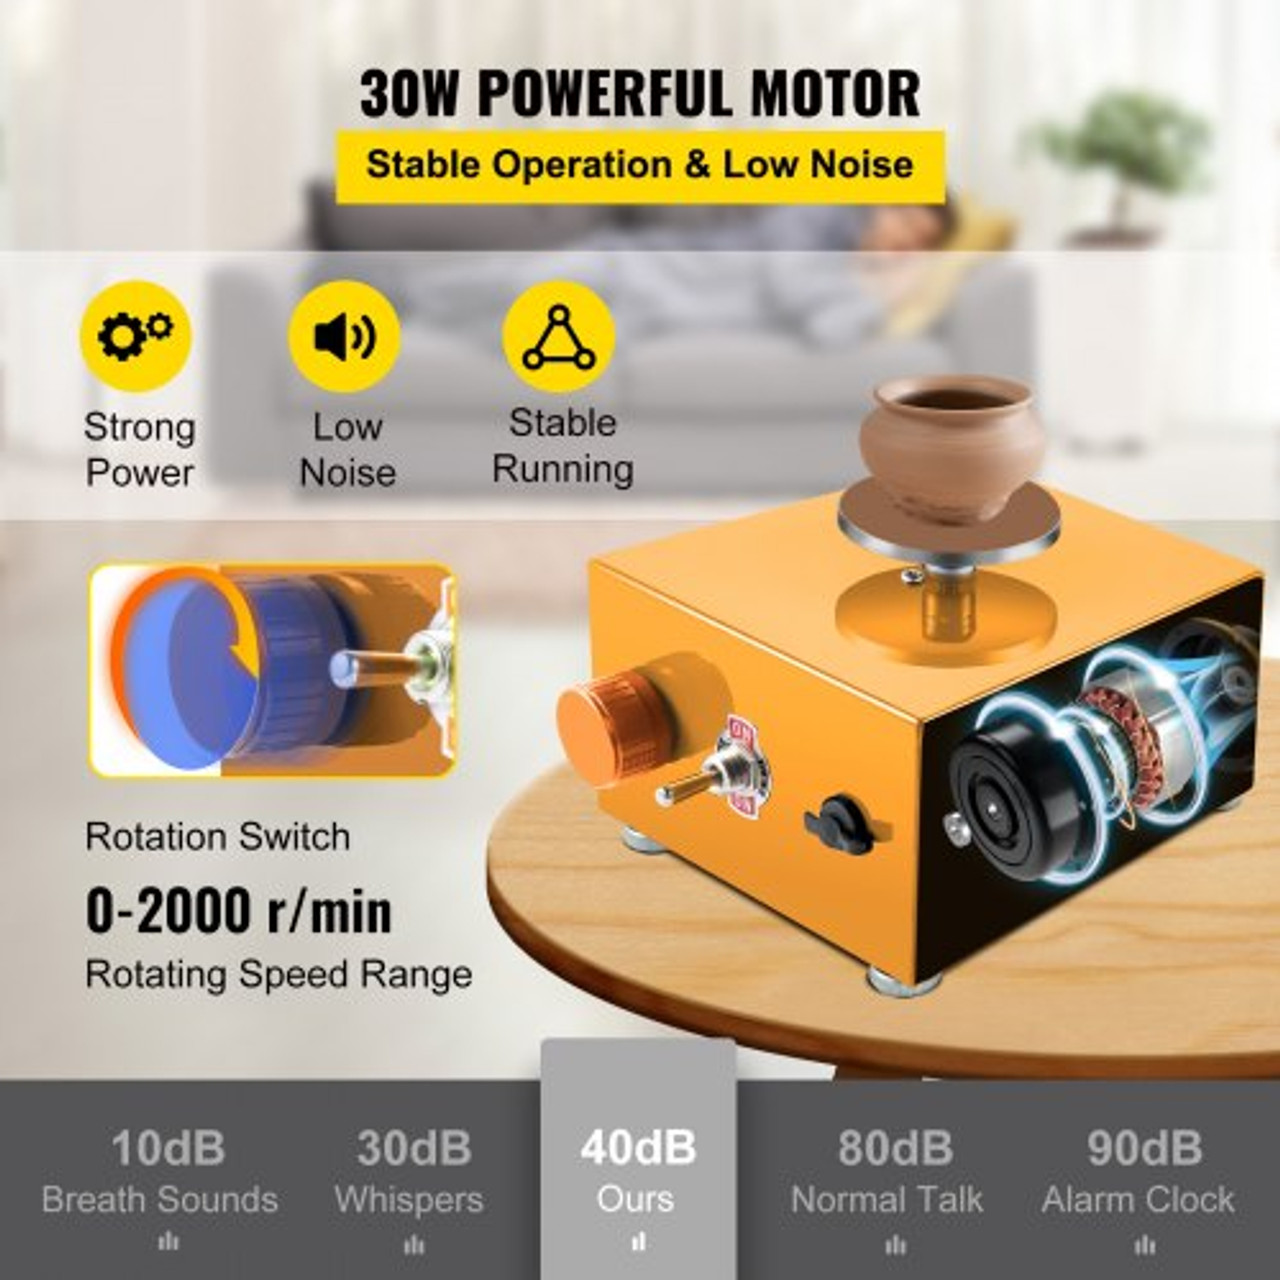 Mini Pottery Wheel 30W Ceramic Wheel Adjustable Speed Clay Machines Electric Sculpting Kits with 3 Turntables Trays and 16pcs Tools for Art Craft Work Molding Gift and Home DIY